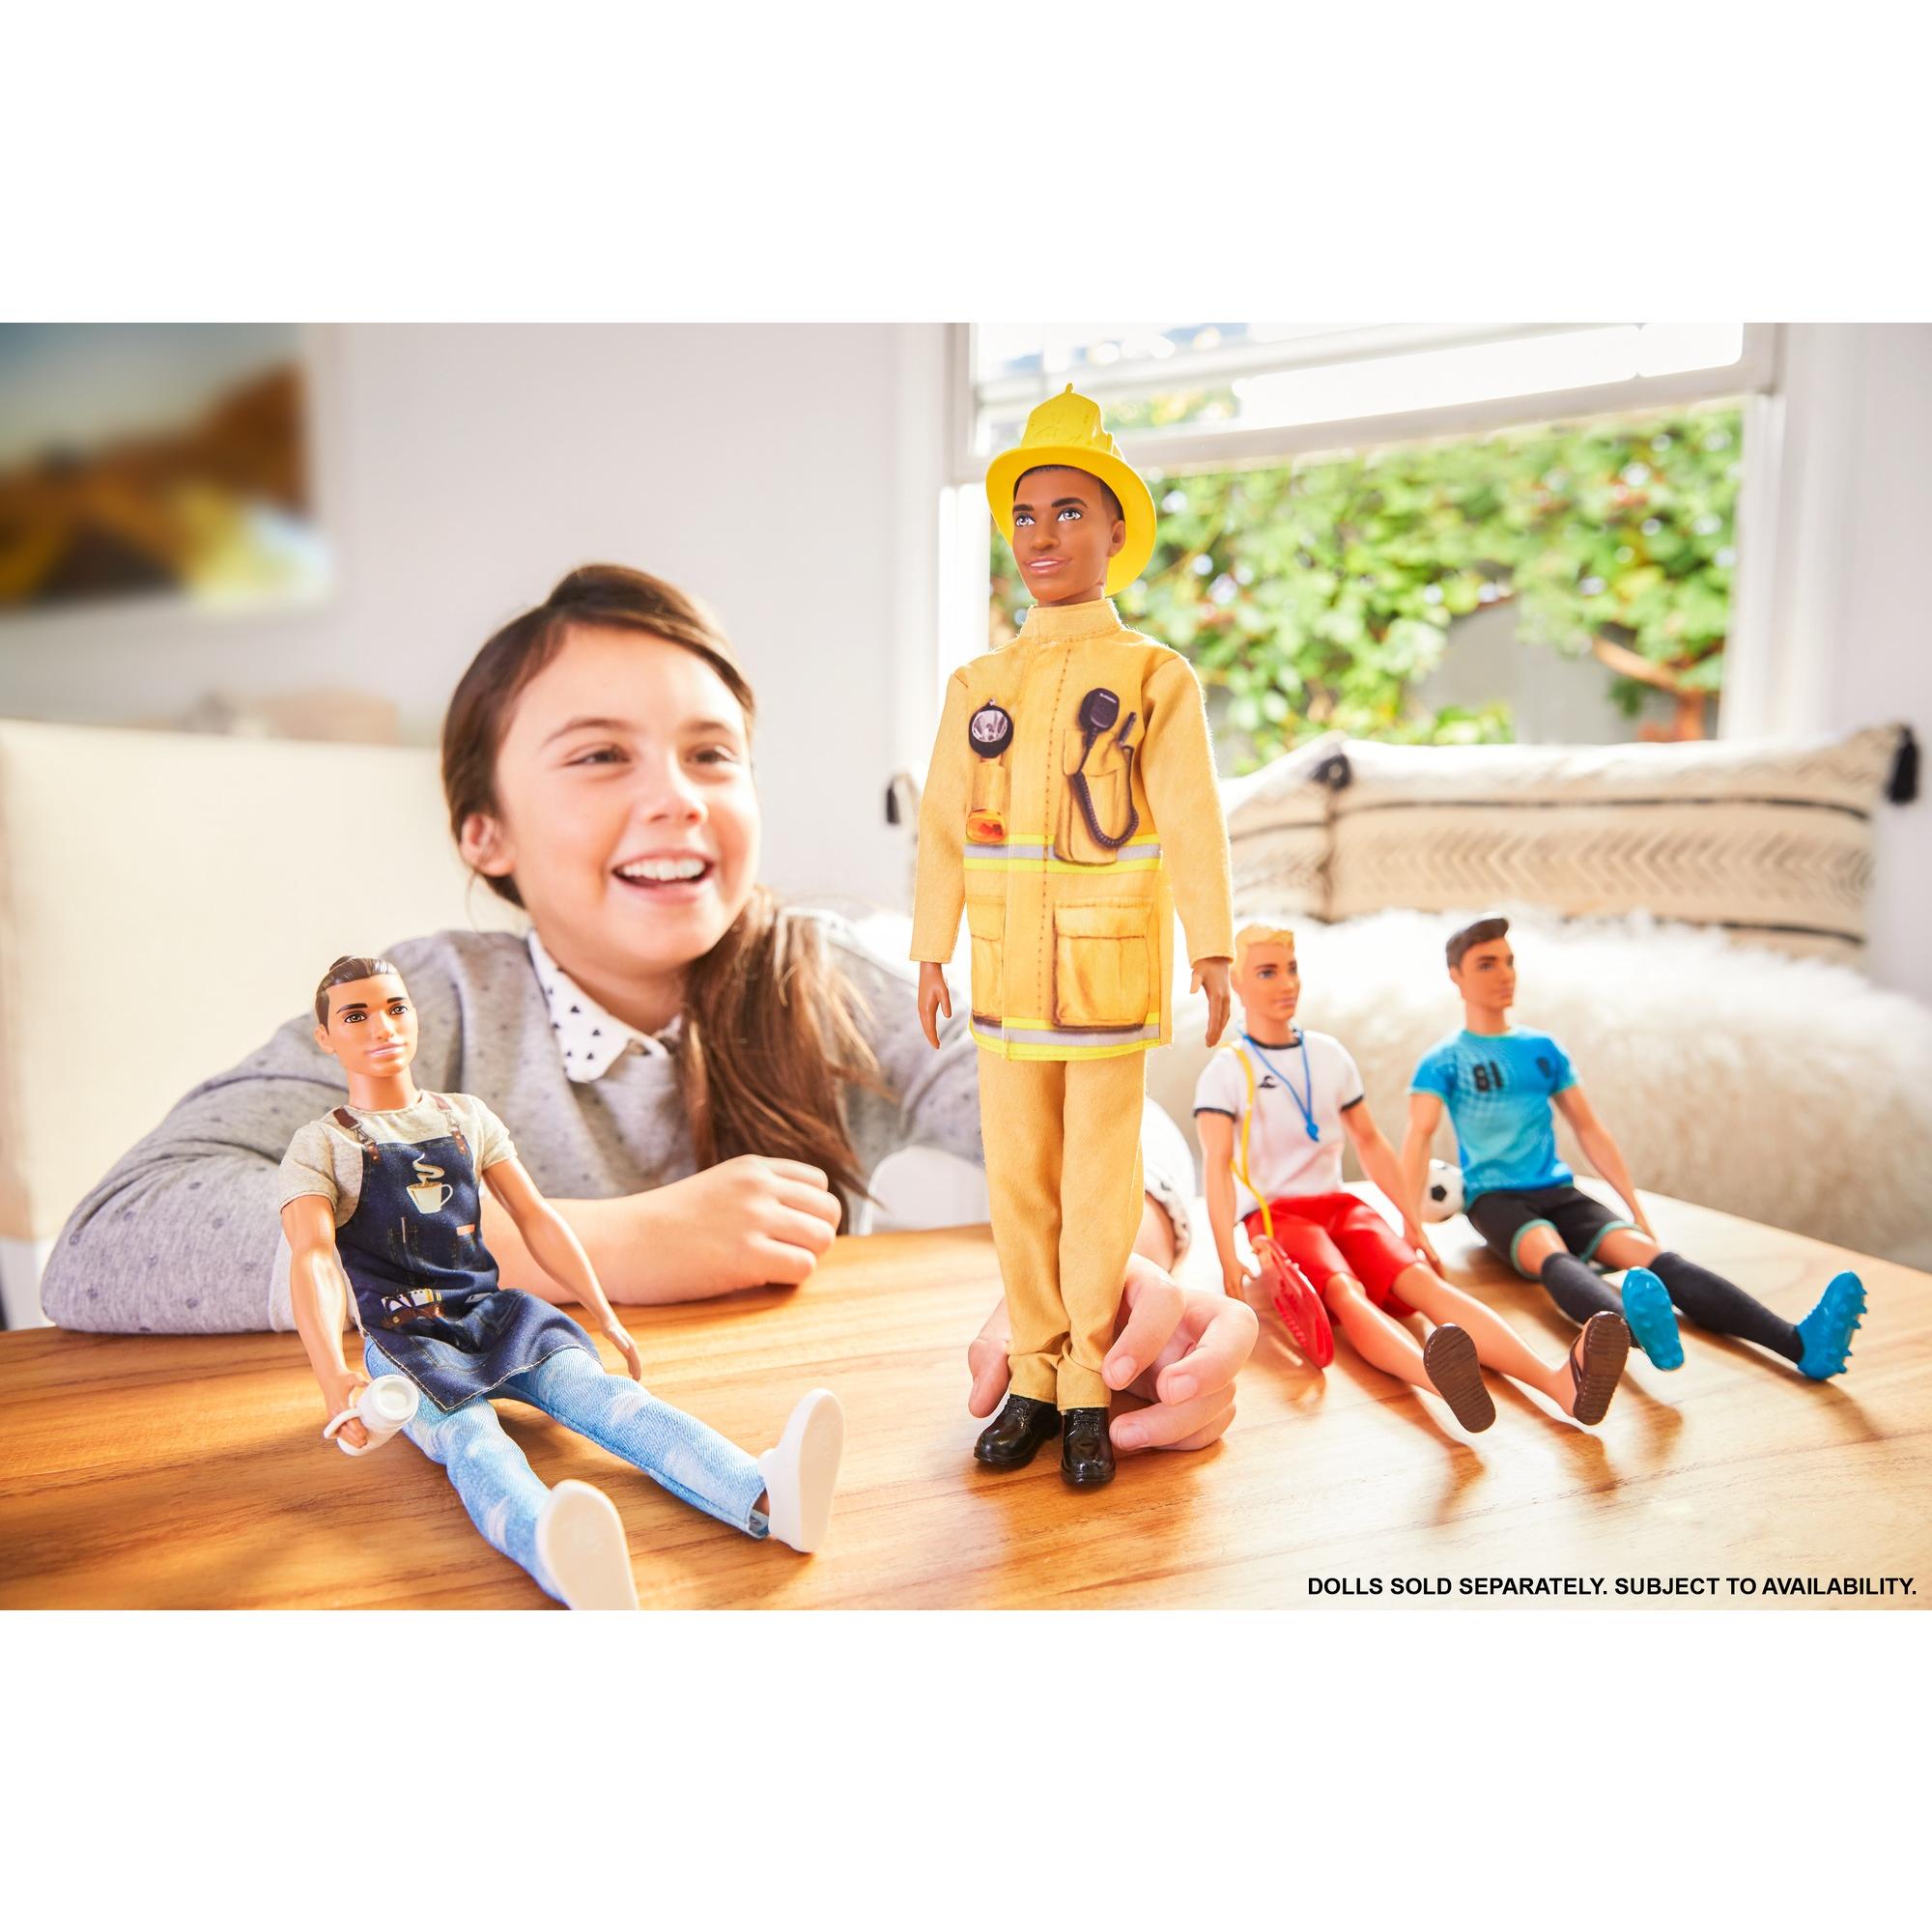 Barbie Ken Careers Firefighter Doll with Career-Themed Accessories - image 2 of 6